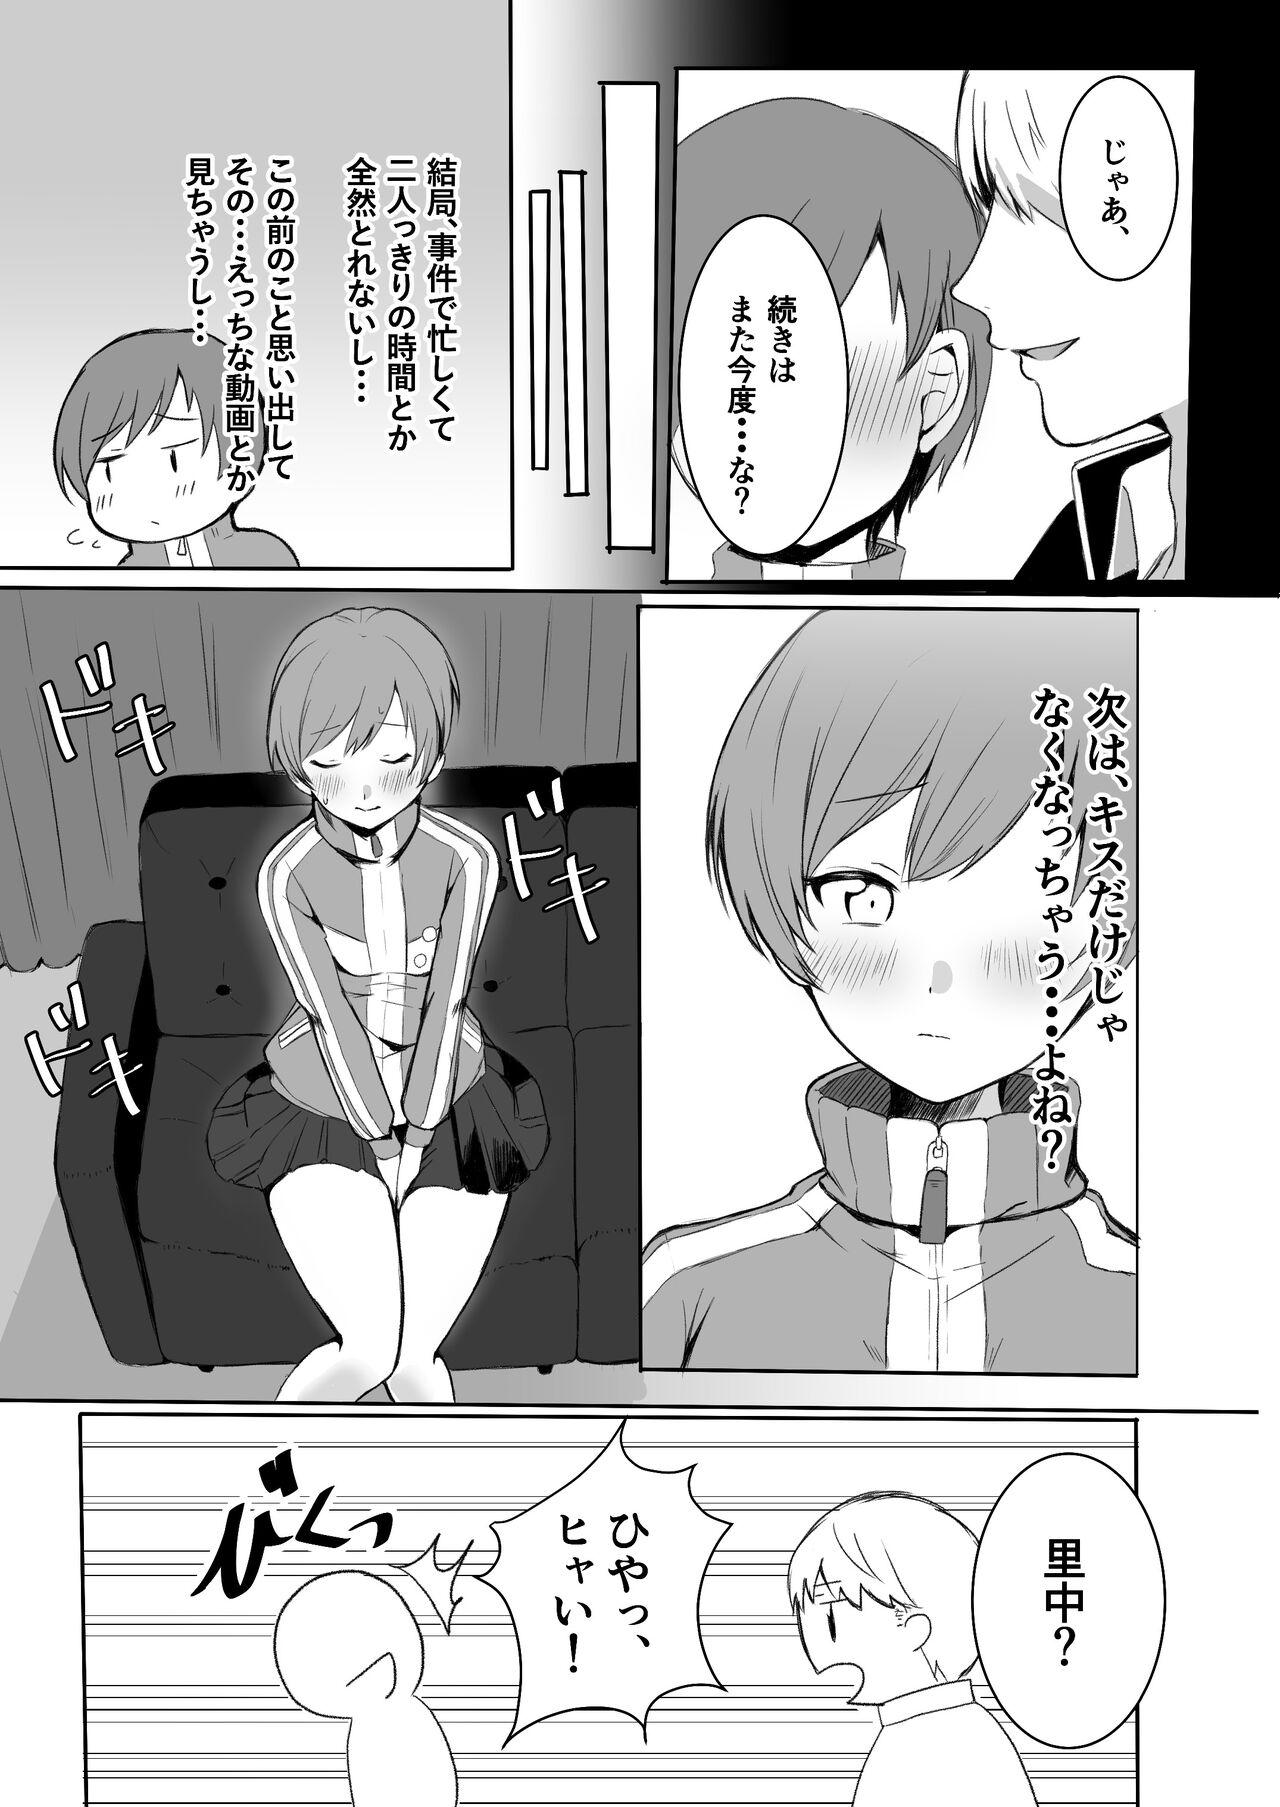 Submission 里中千枝は我慢できない - Persona 4 From - Page 8